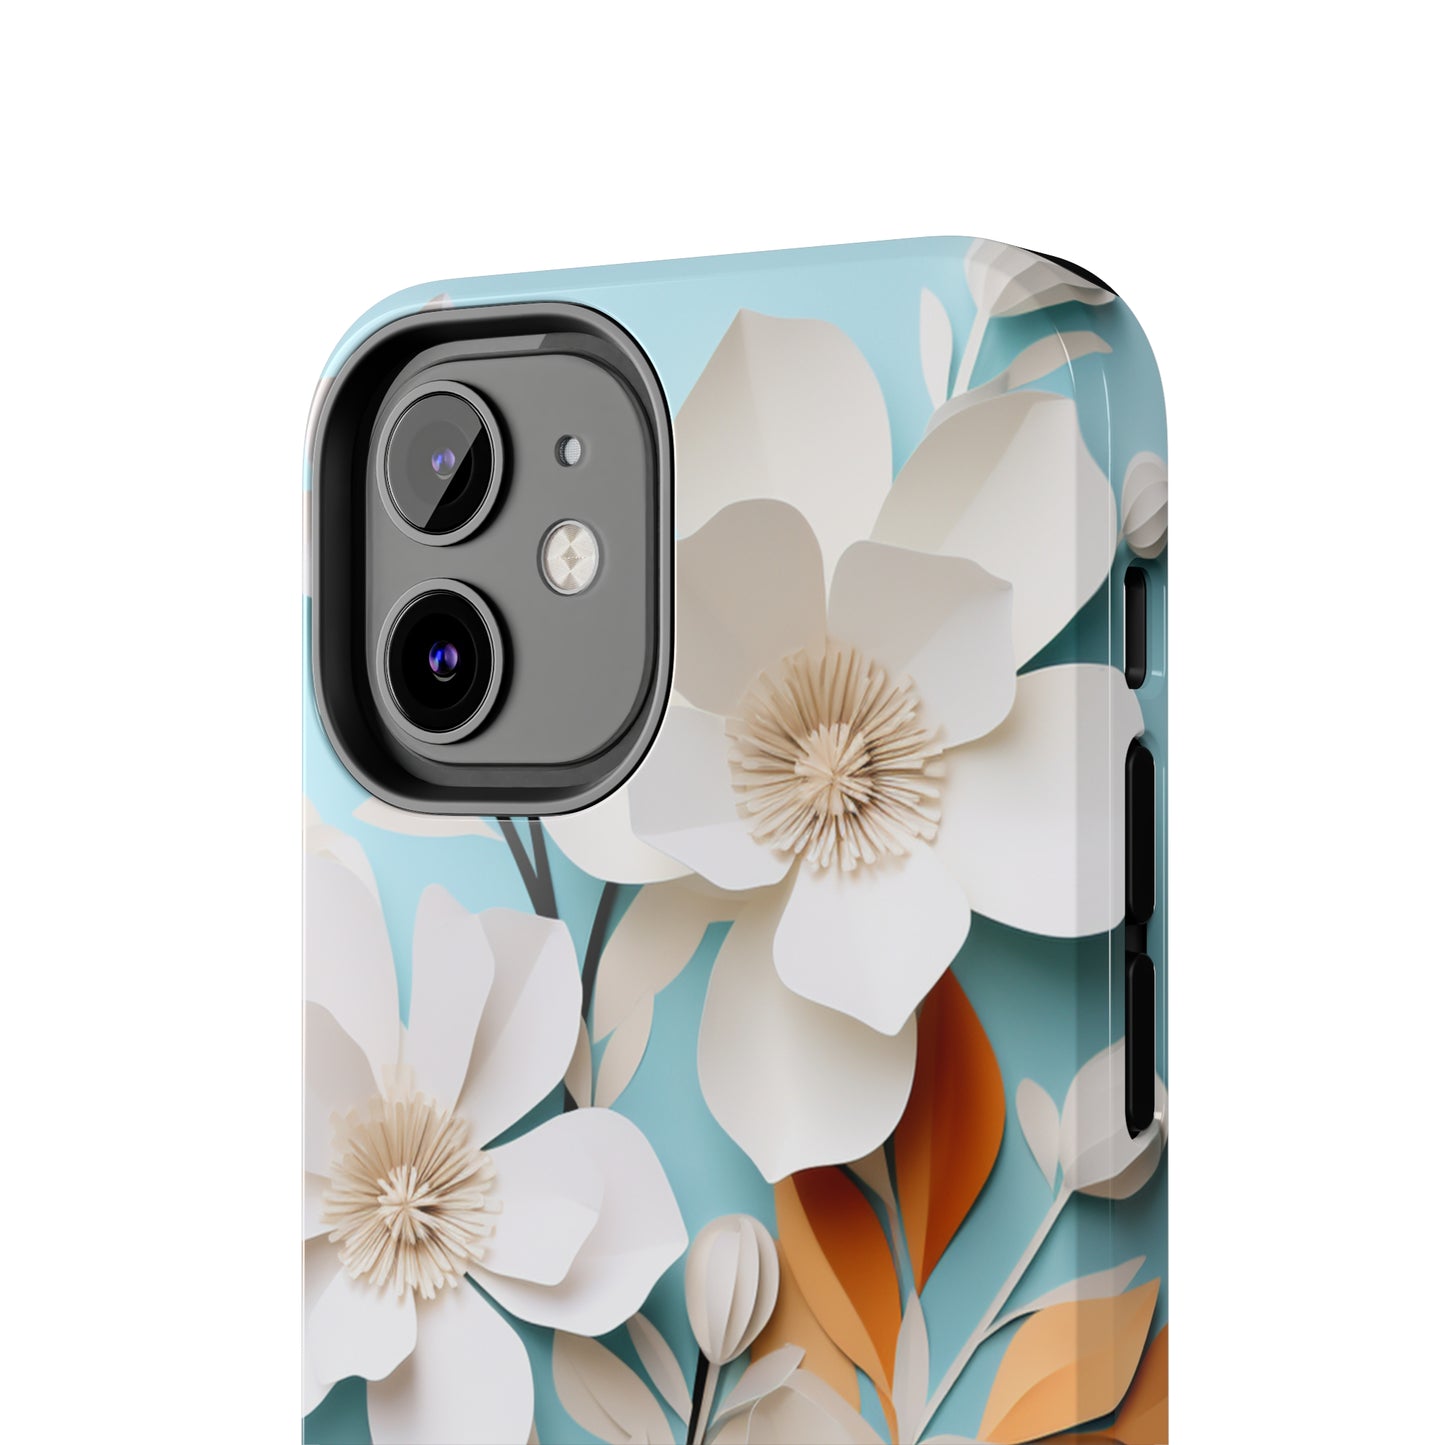 Paper Floral iPhone Case | Delicate Elegance and Nature-Inspired Beauty